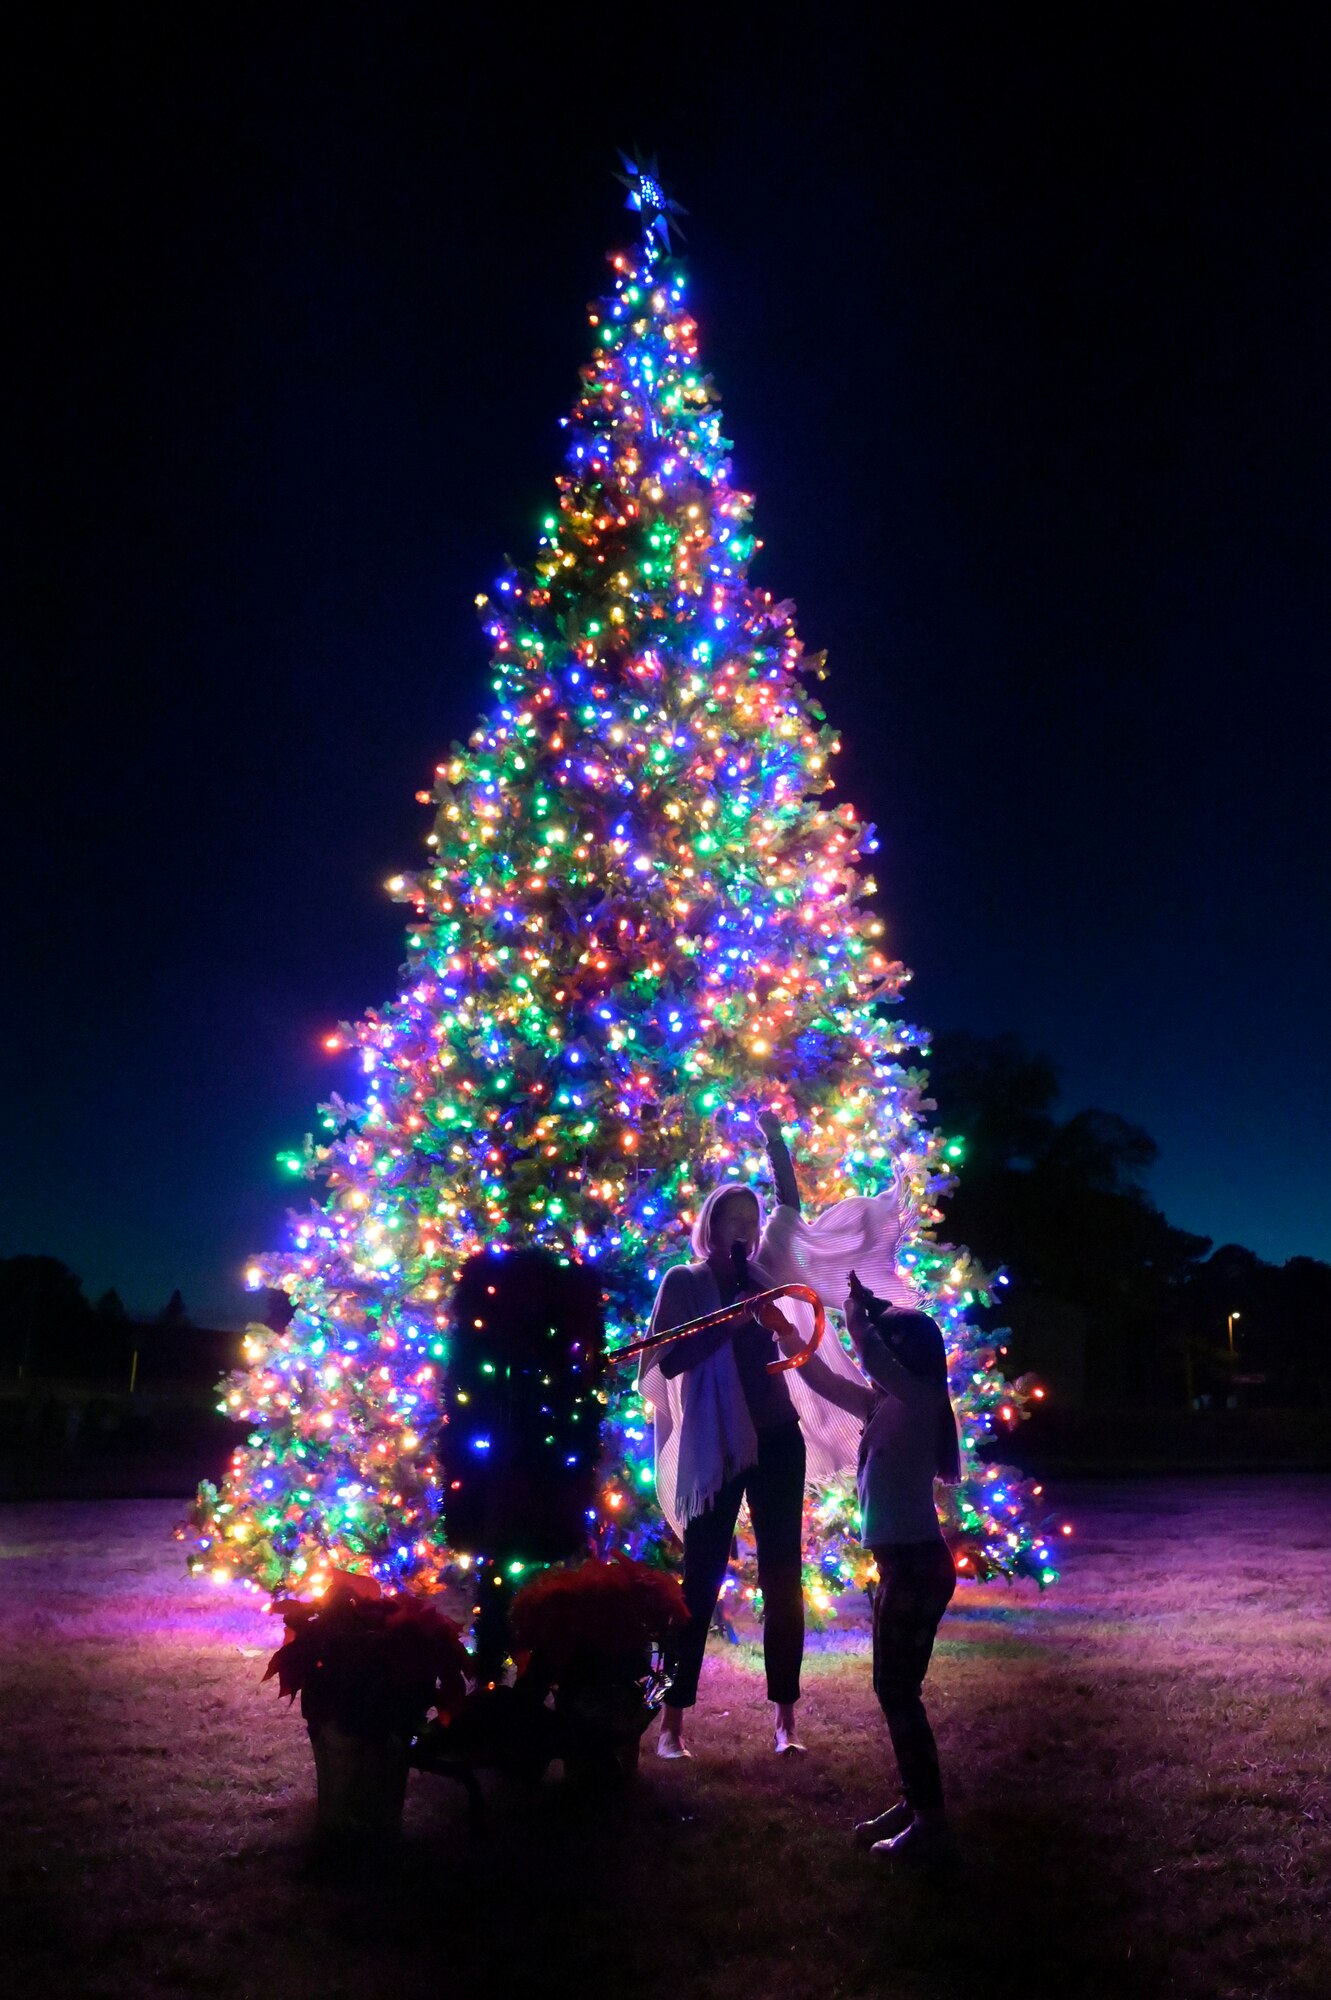 Two people activate the lights on the holiday tree